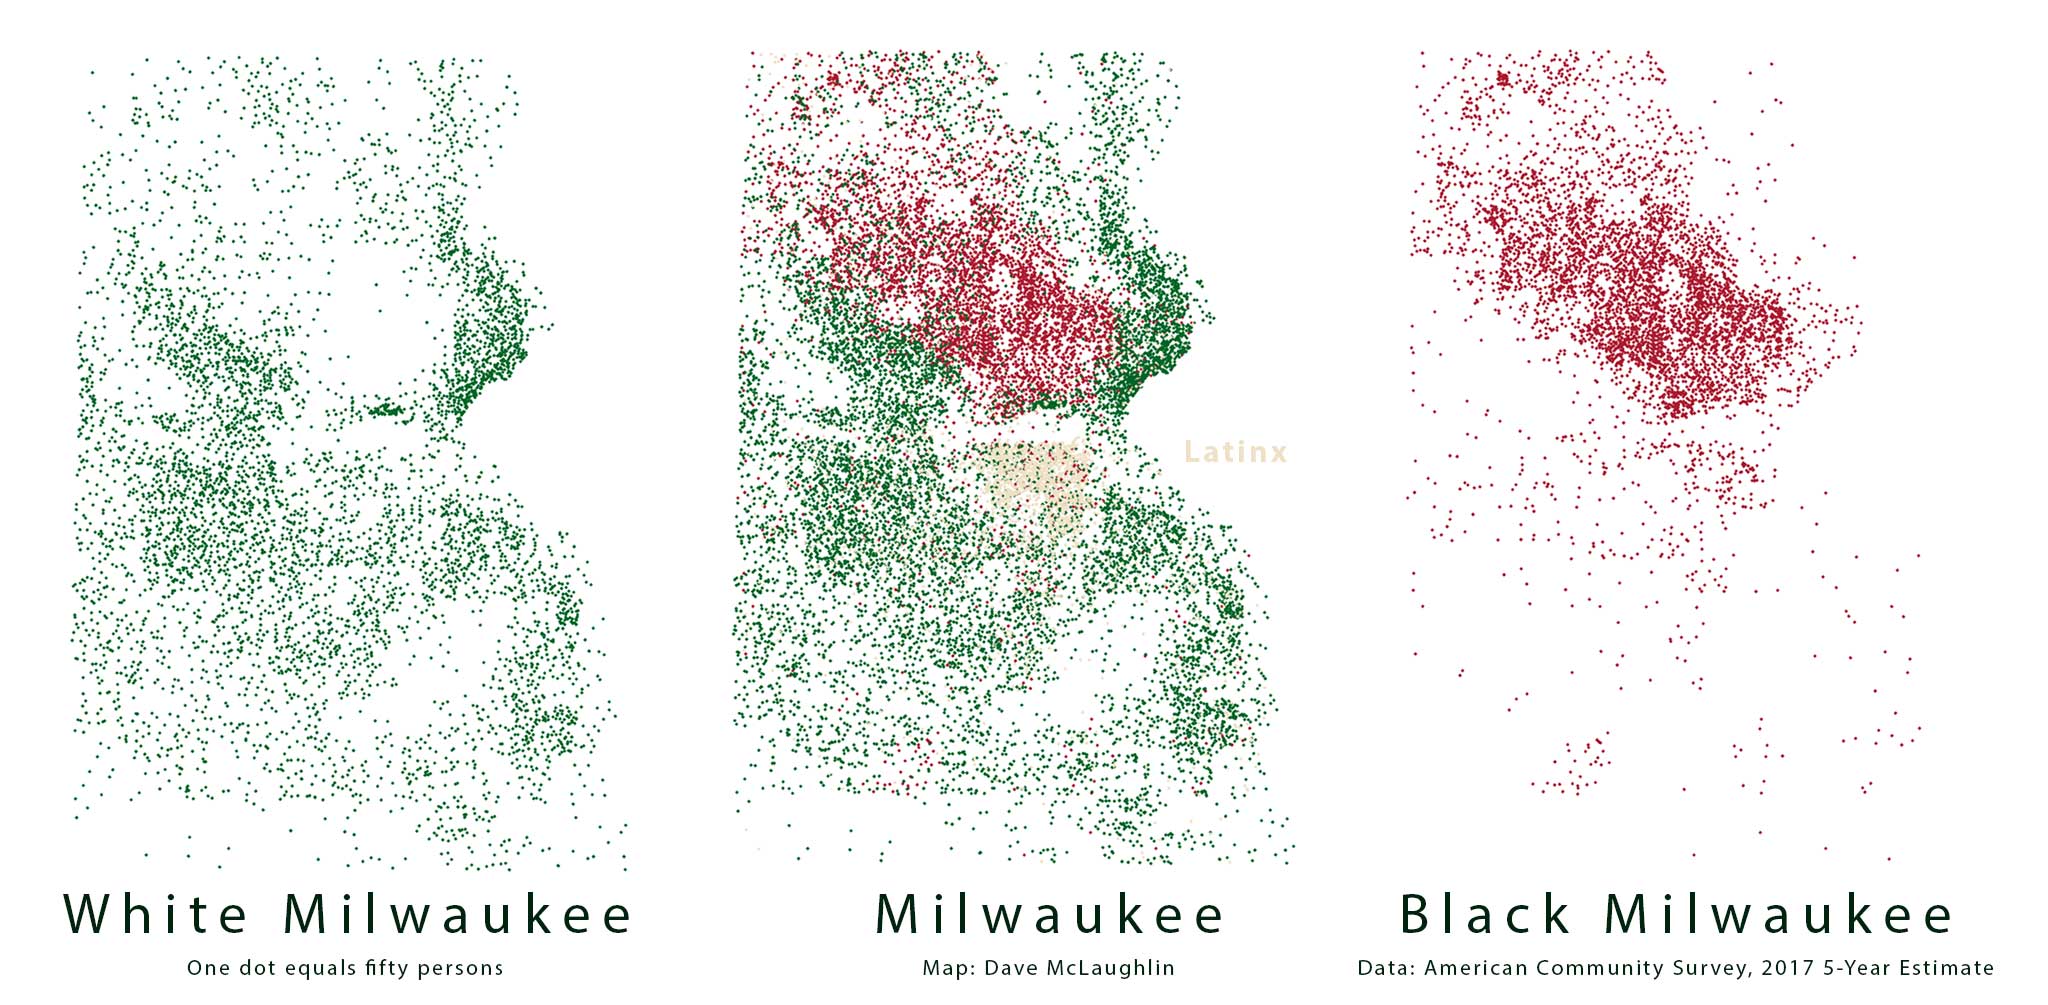 Three maps of Milwaukee, showing the white and black populations, as well as the three major racial groups together.